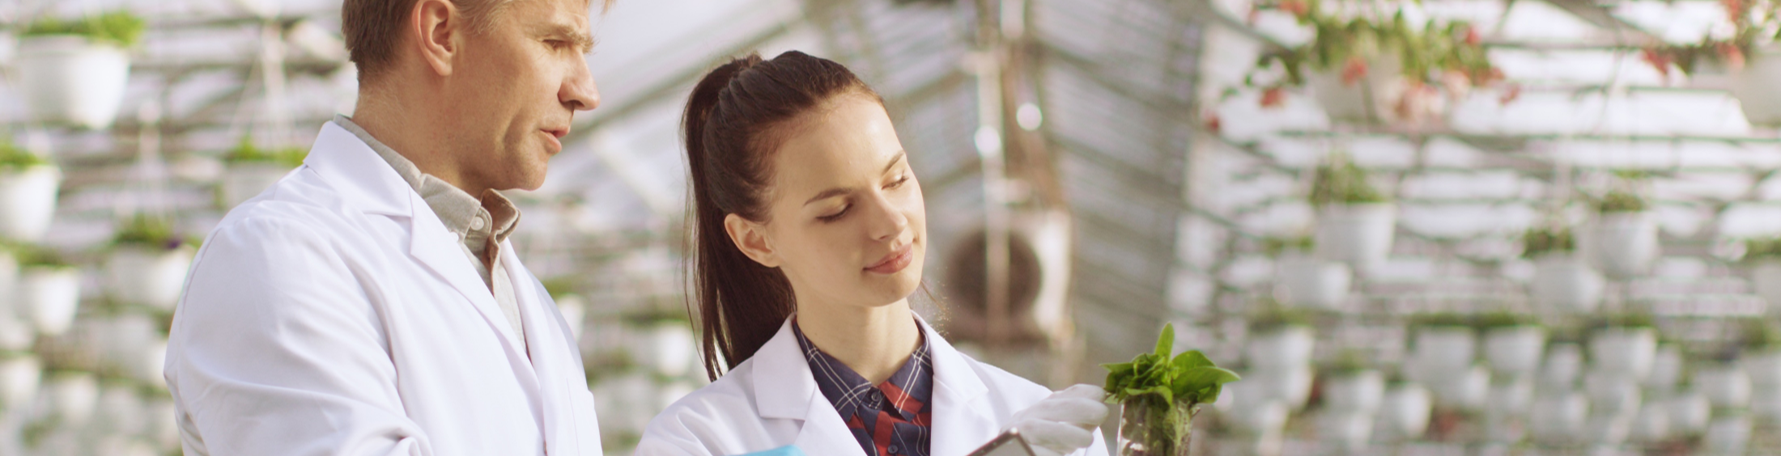 Two people in lab coats examining a plant